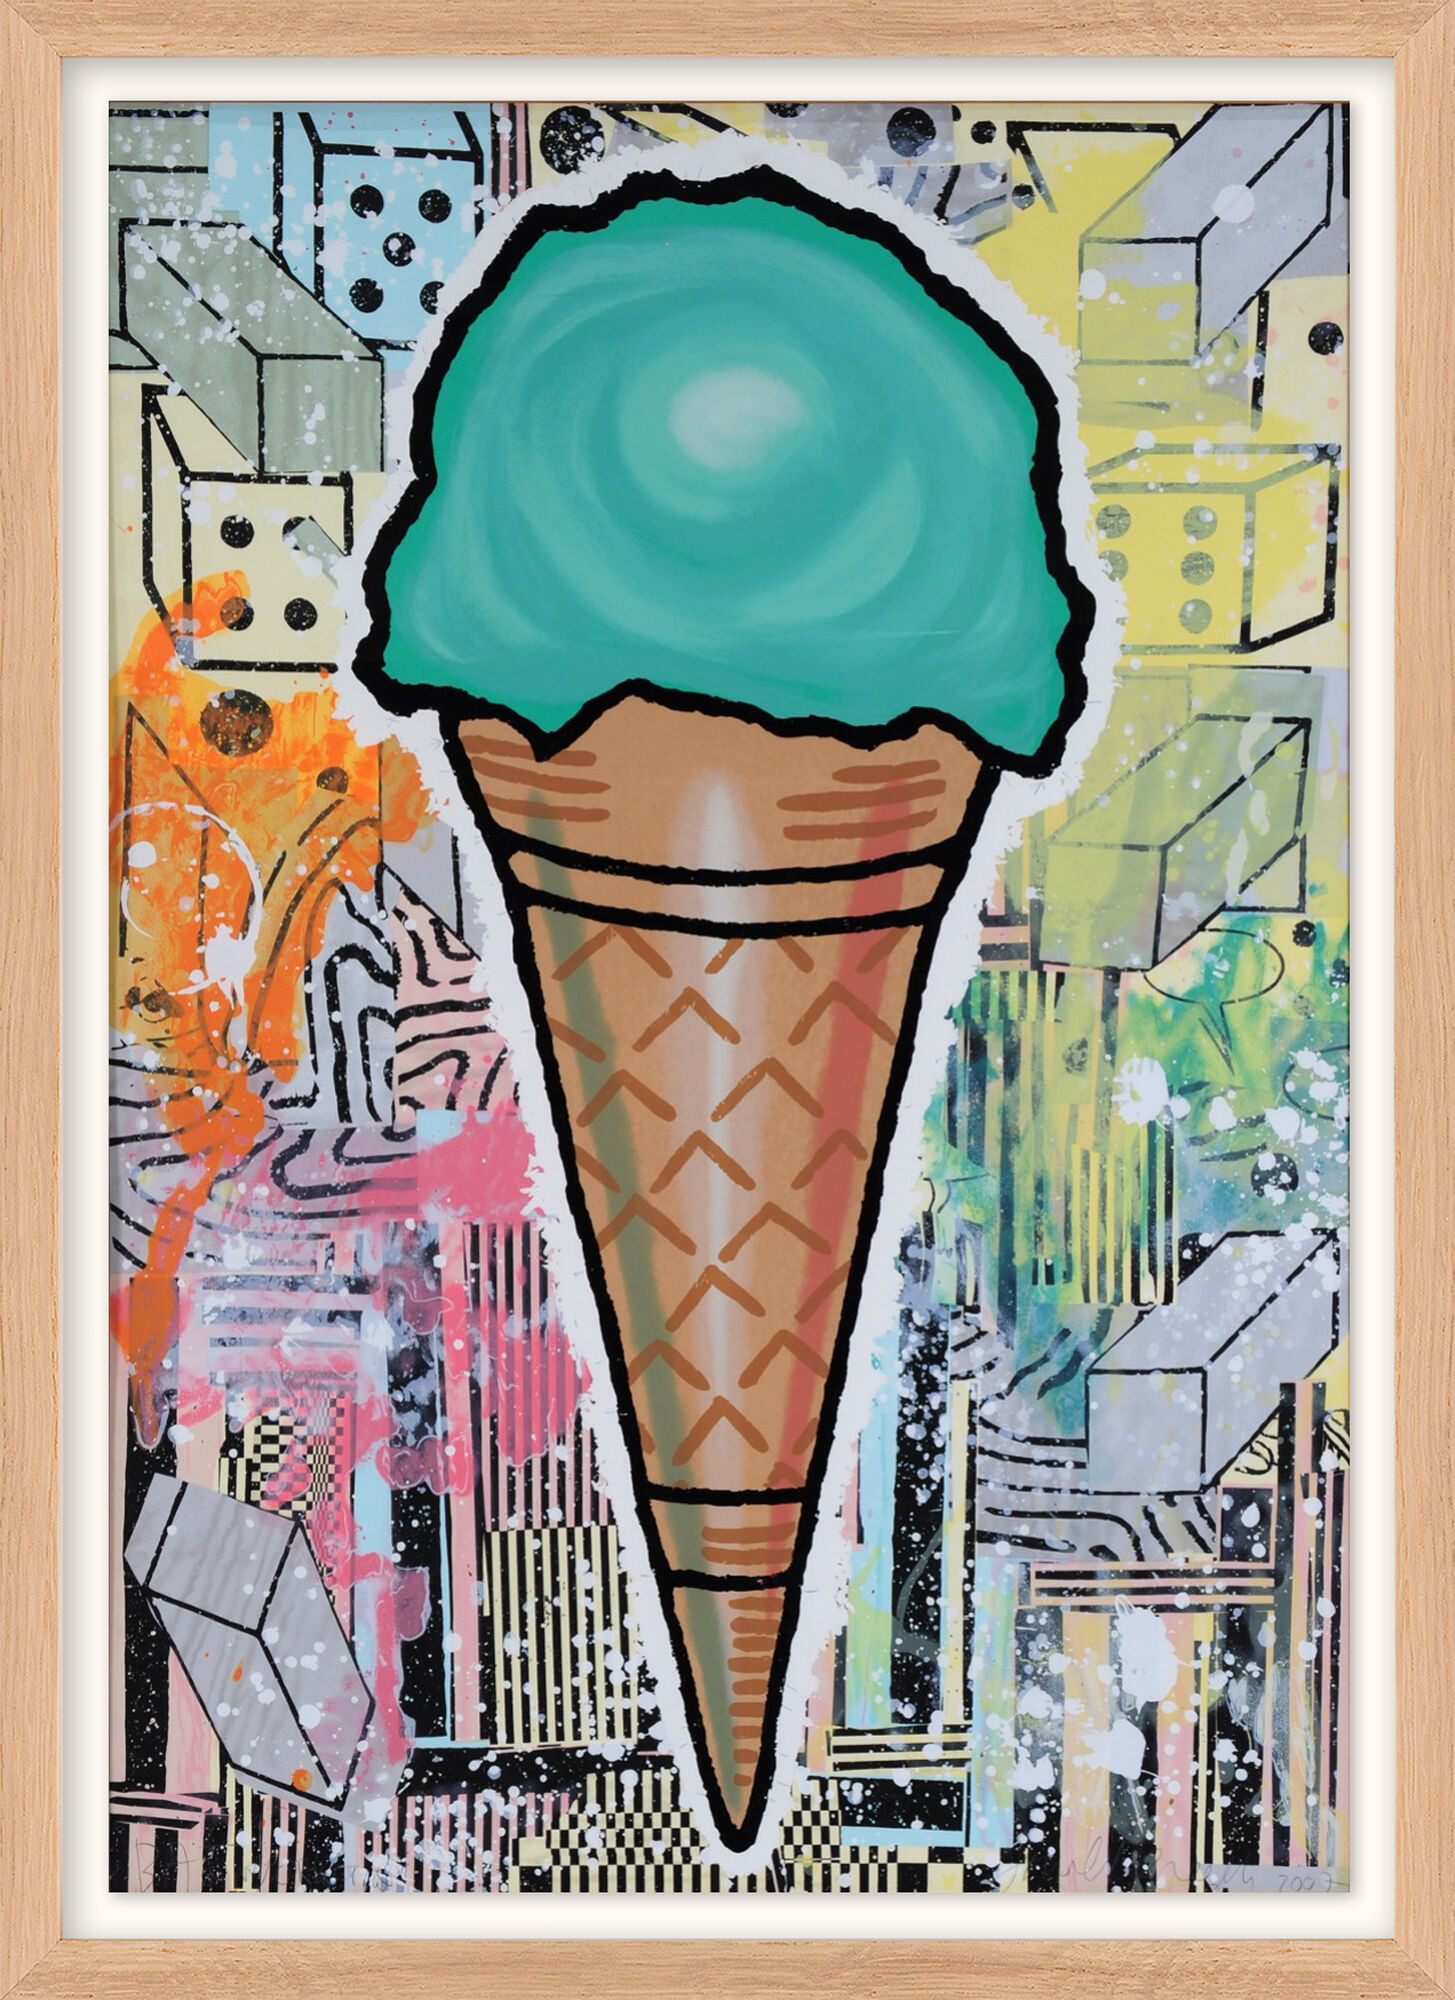 Picture "Green cone" (2007) by Donald Baechler